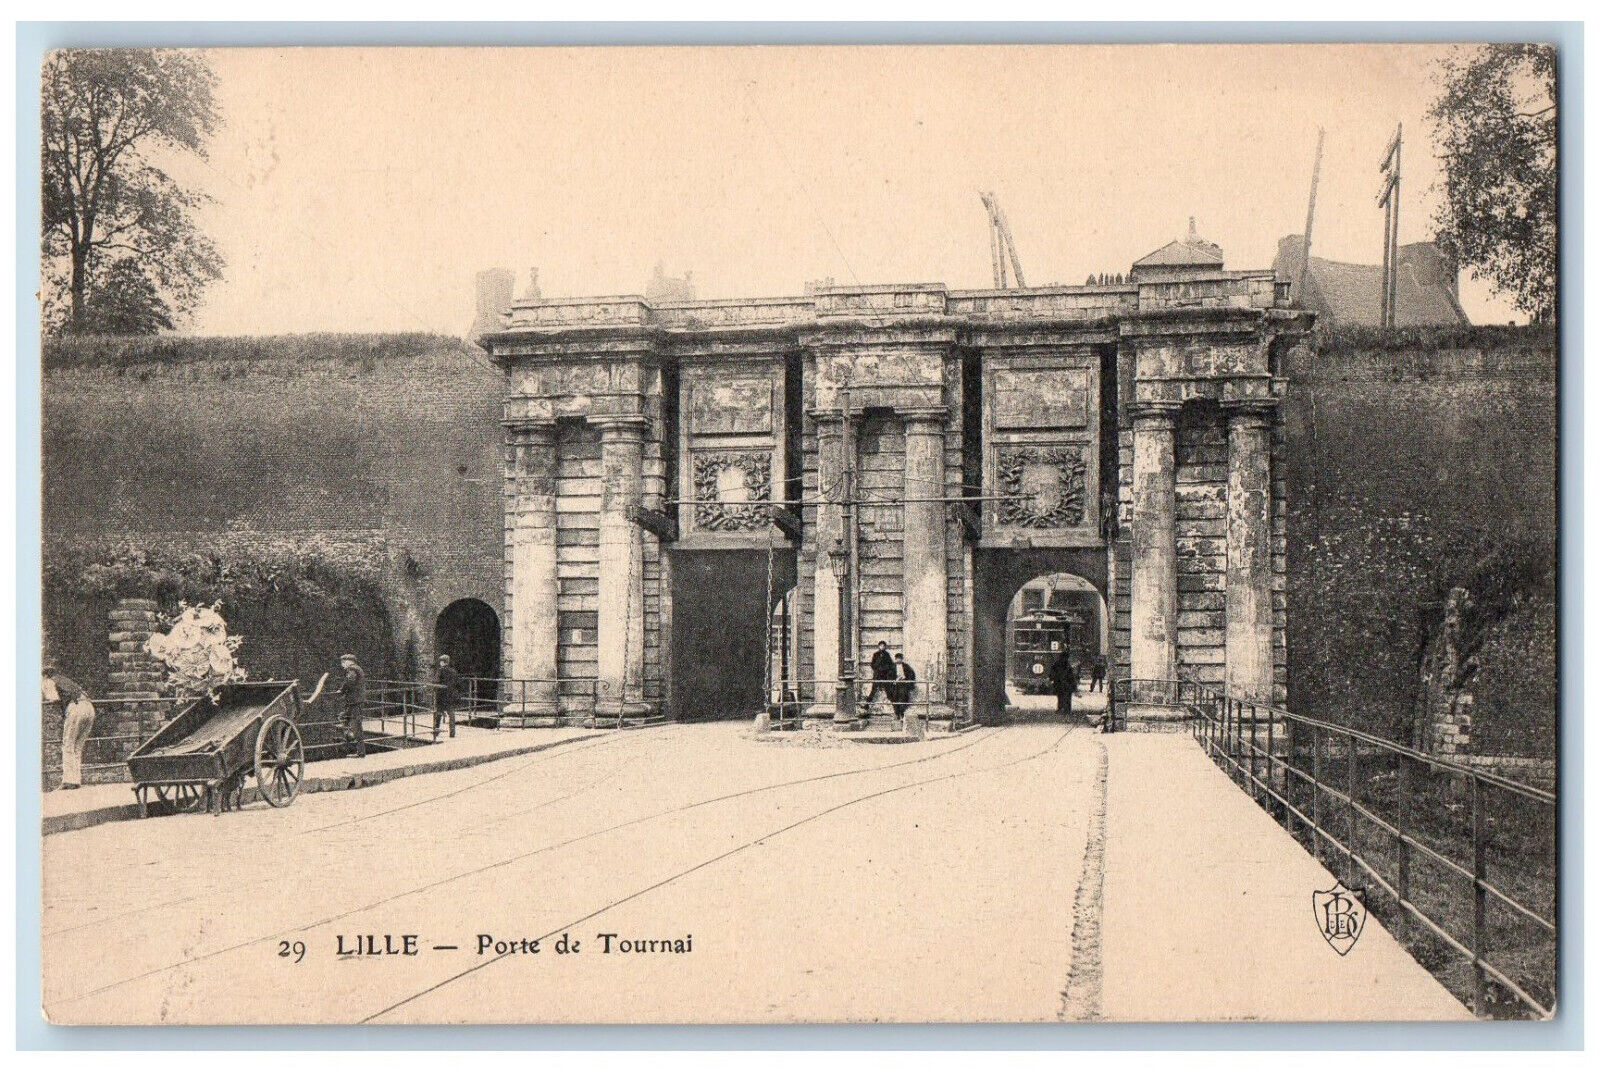 Lille Nord France Postcard Tournai Gate Arch Entrance 1905 Antique Posted